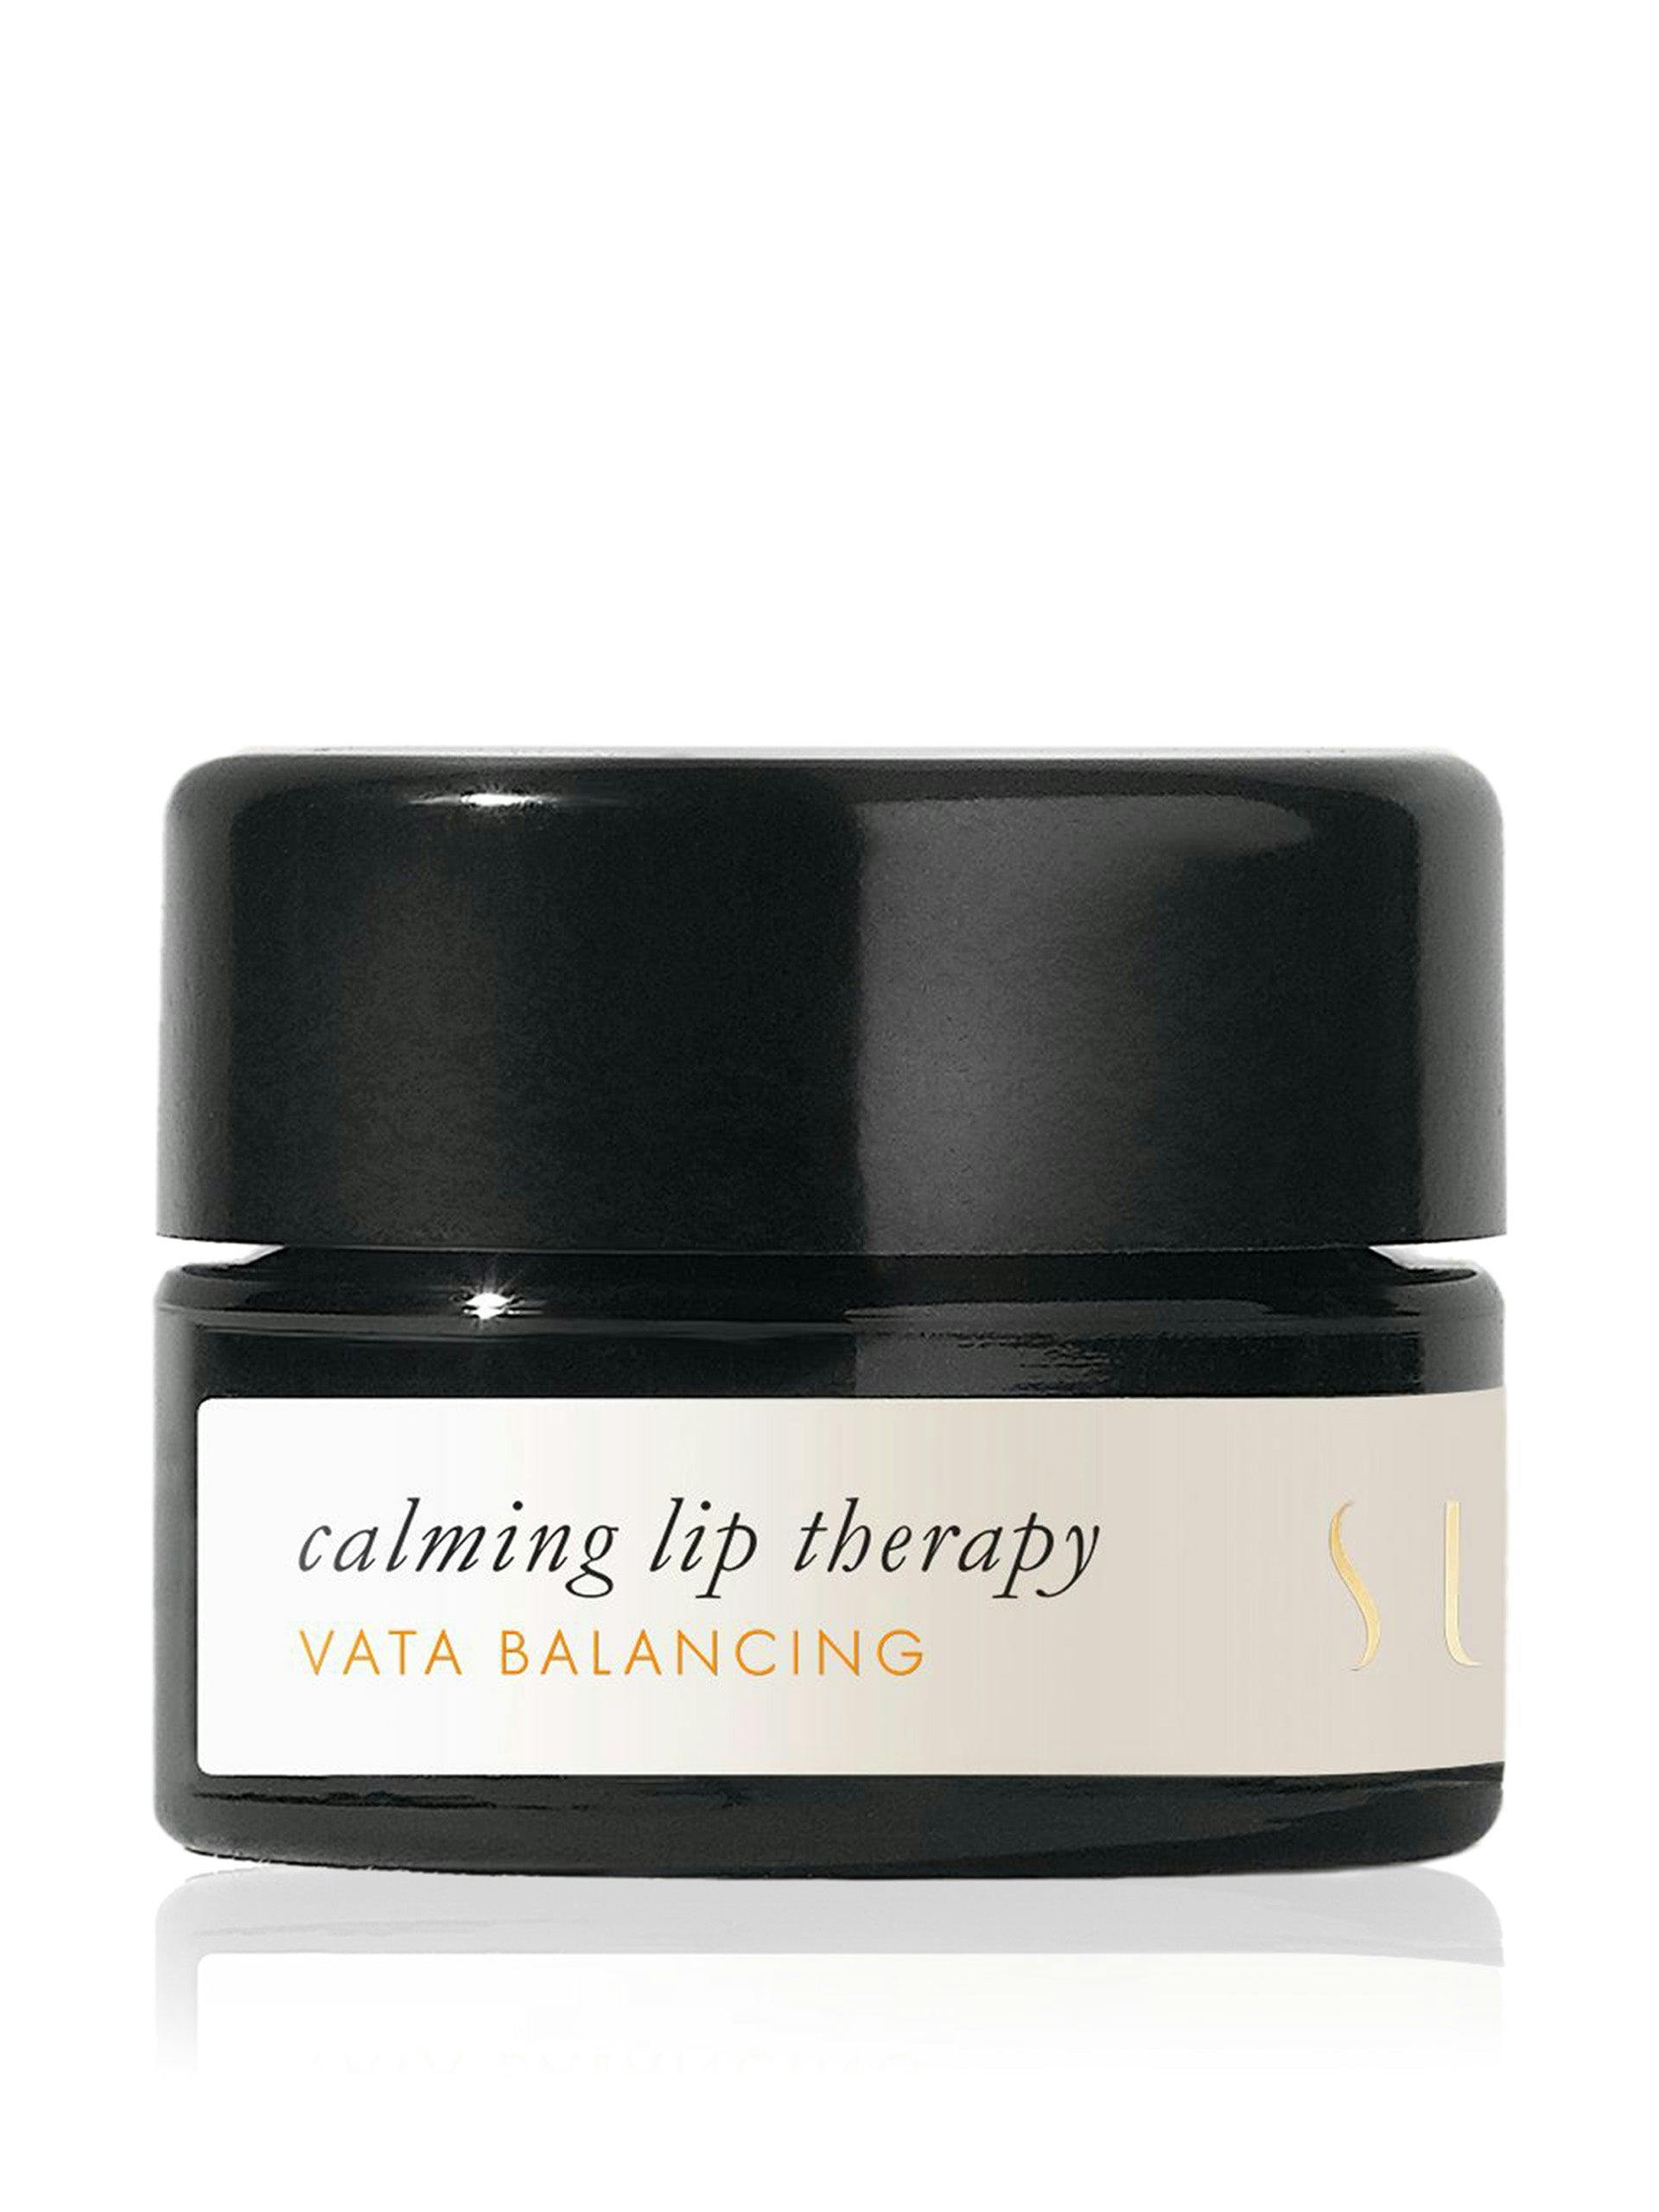 Calming lip therapy